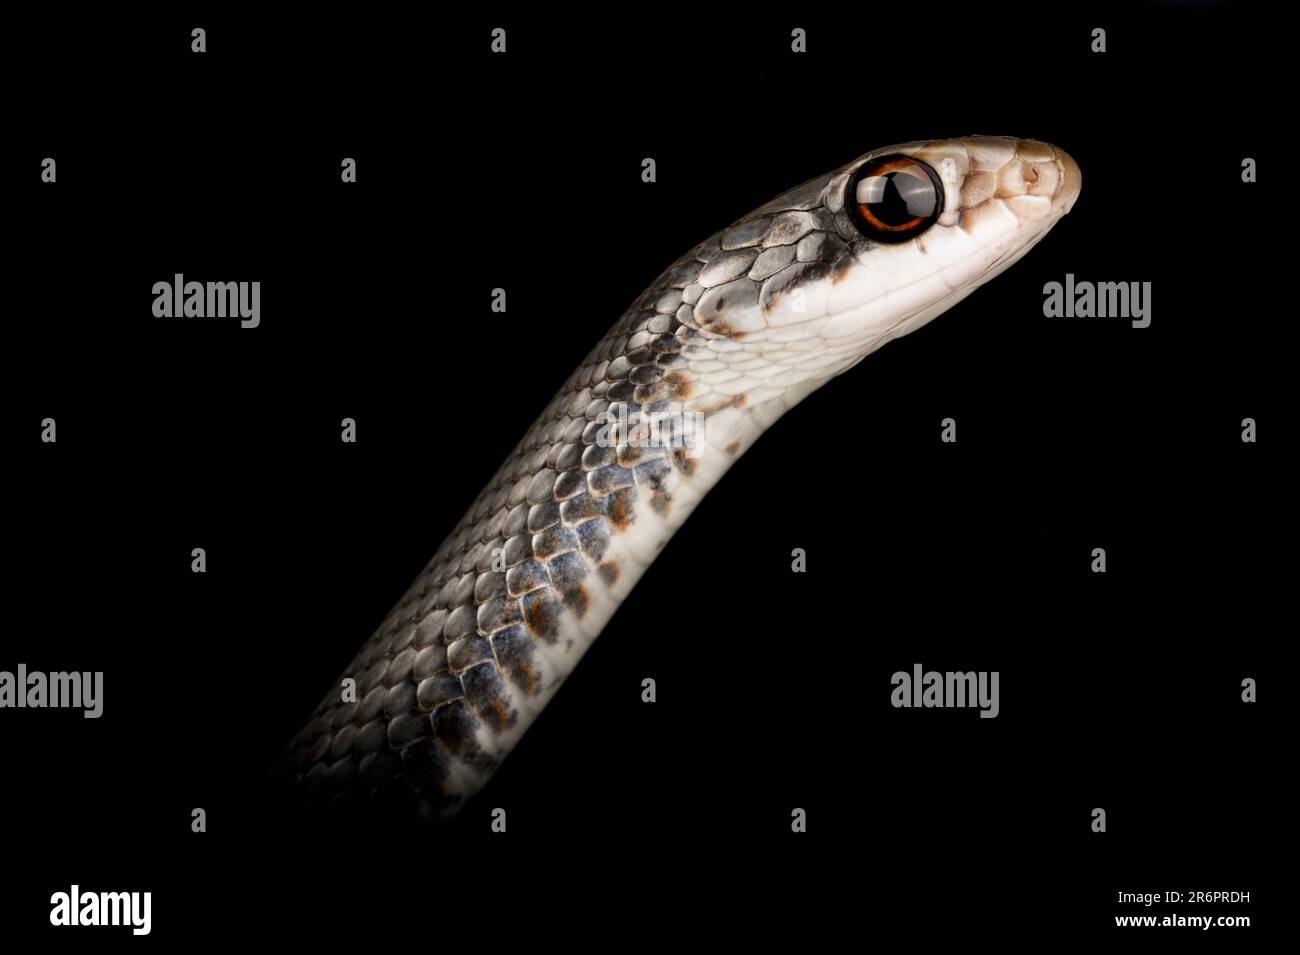 North American racer (Coluber constrictor) Stock Photo